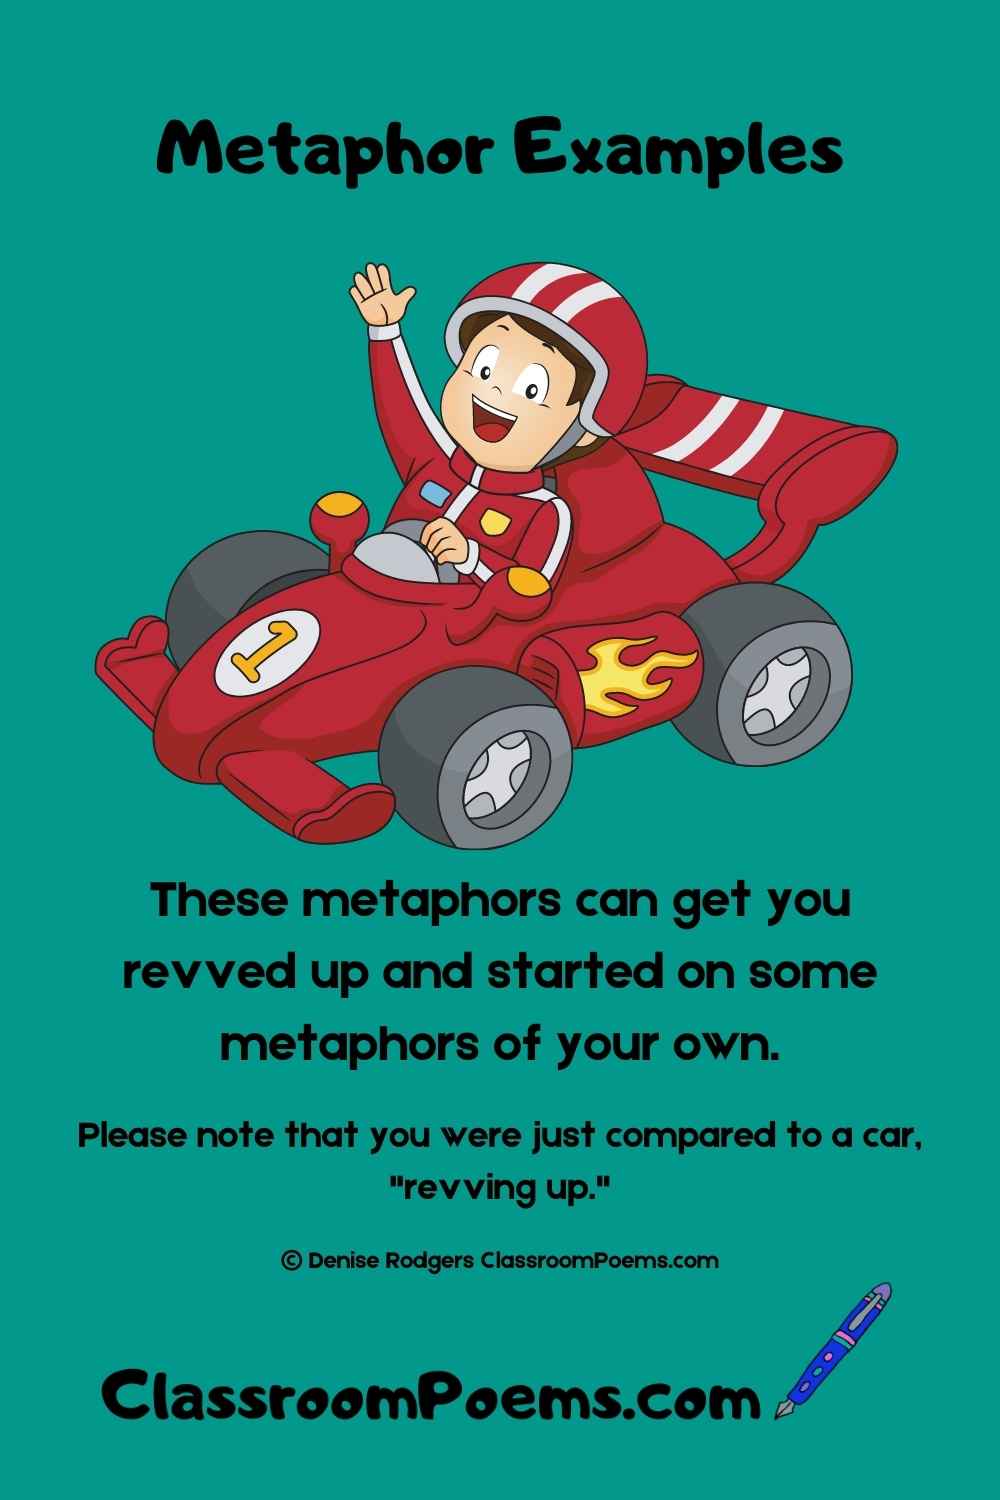 Revving car metaphor example by Denise Rodgers  on ClassroomPoems.com